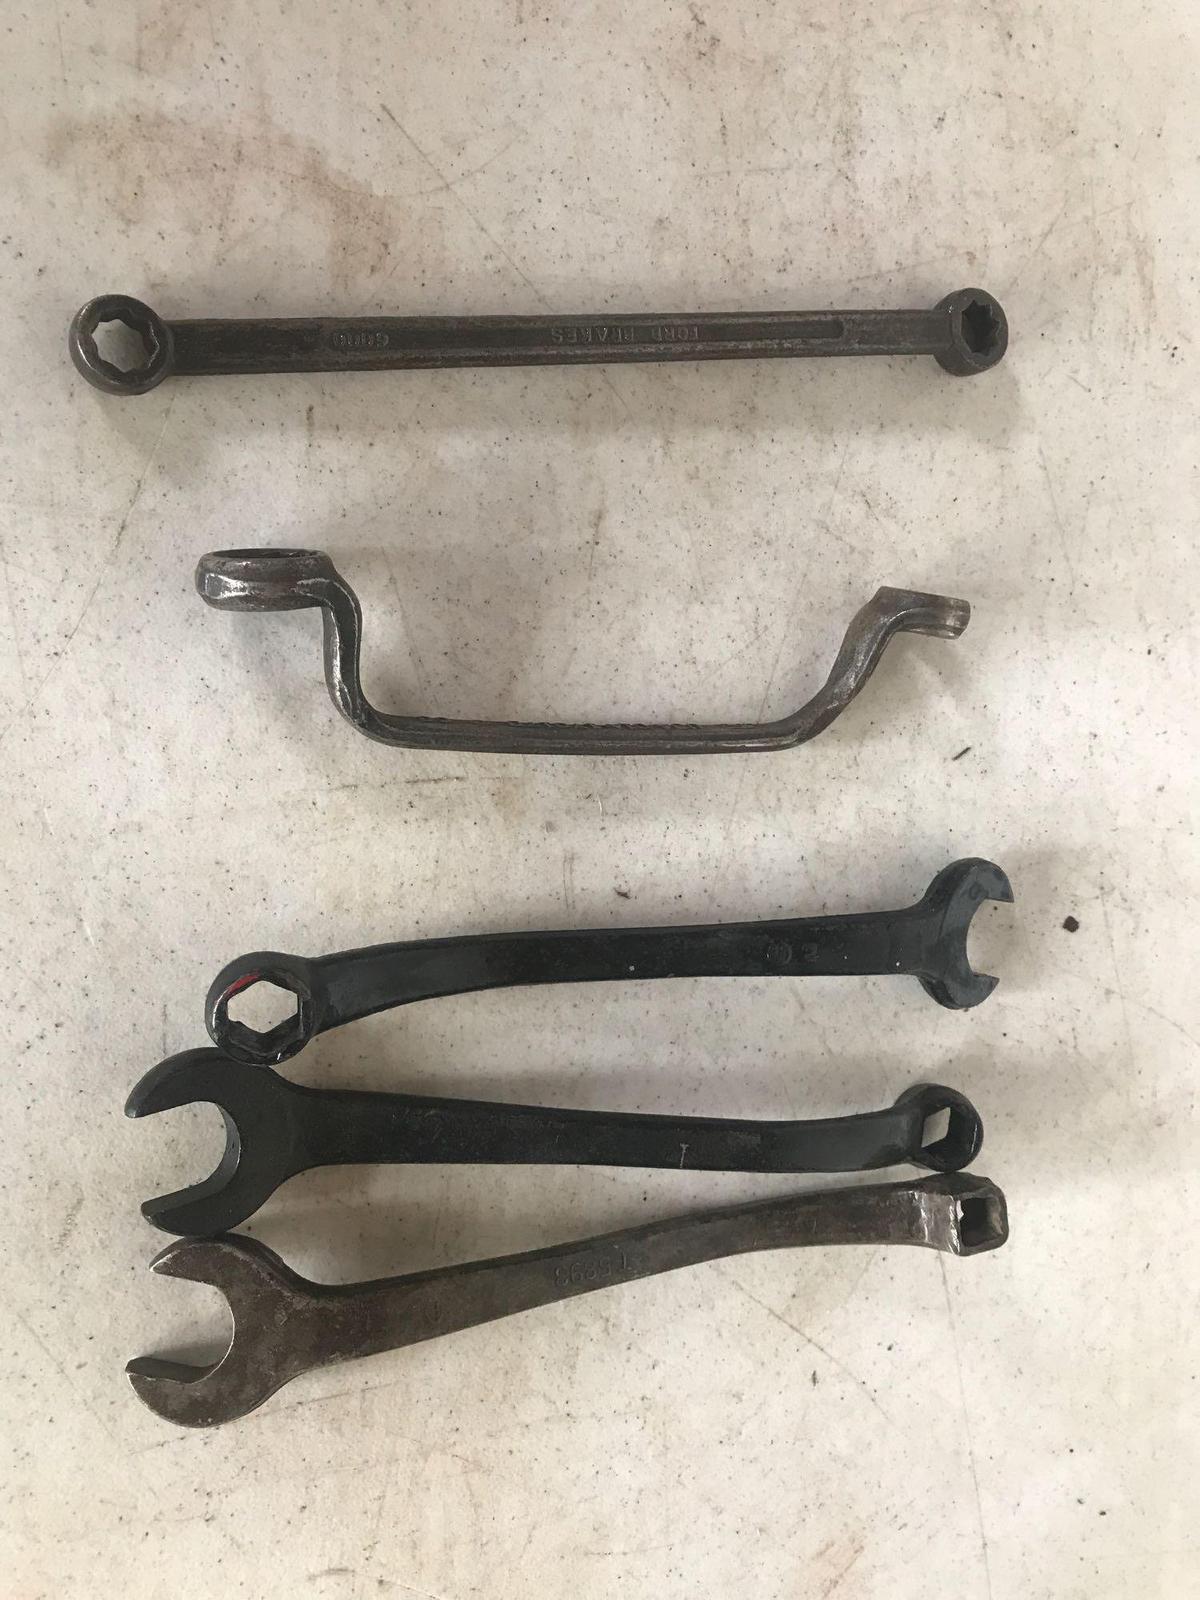 5 ford wrenches